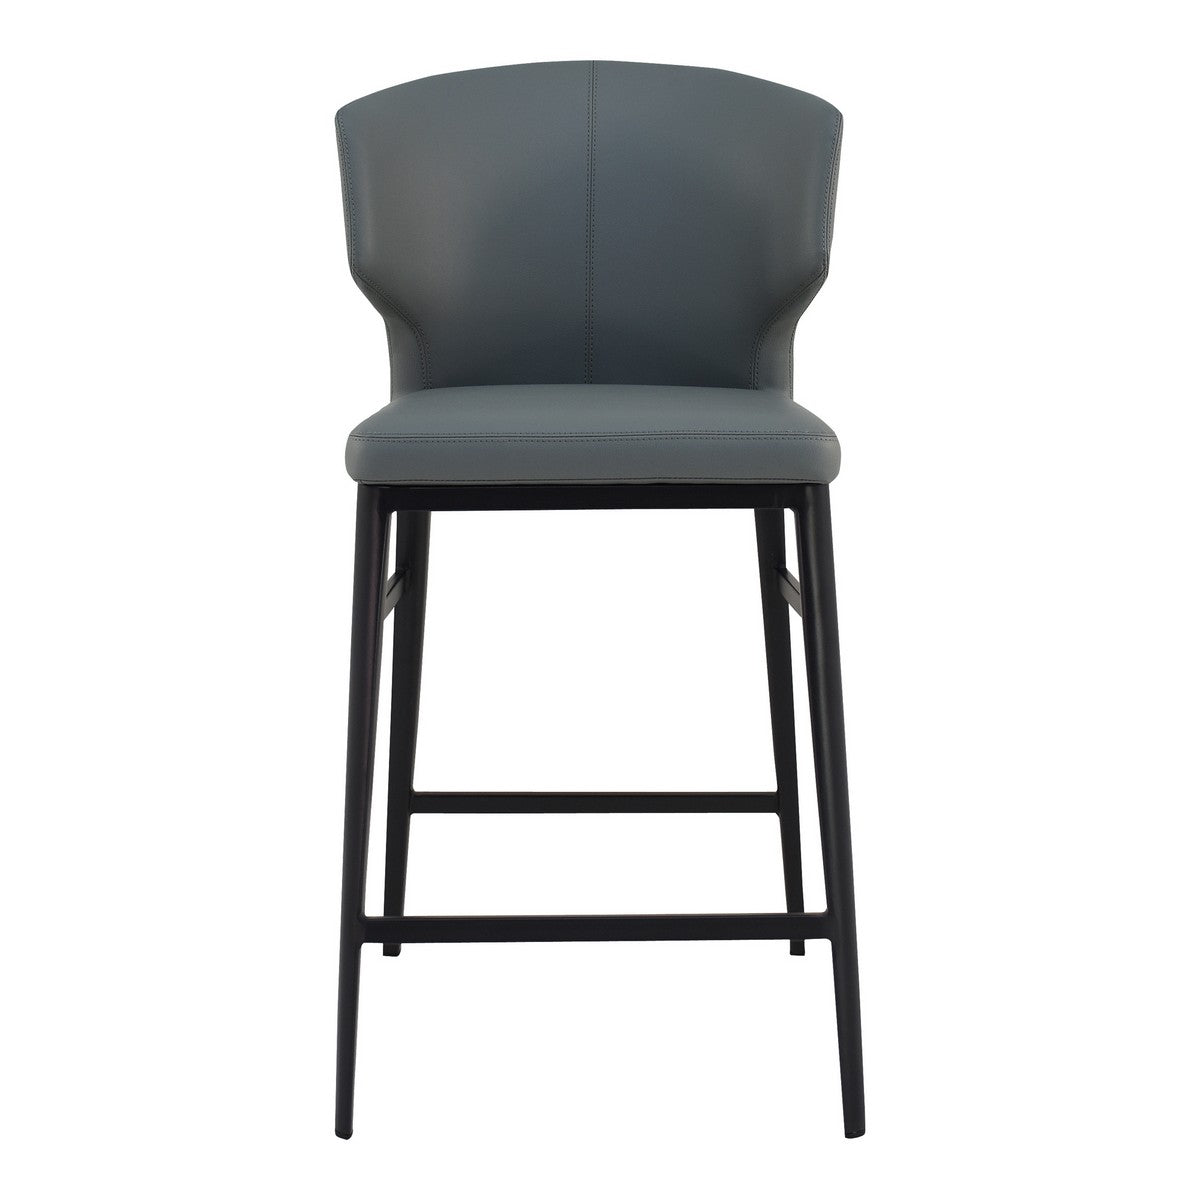 Moe's Home Collection Delaney Counter Stool Grey - EJ-1022-15 - Moe's Home Collection - Counter Stools - Minimal And Modern - 1